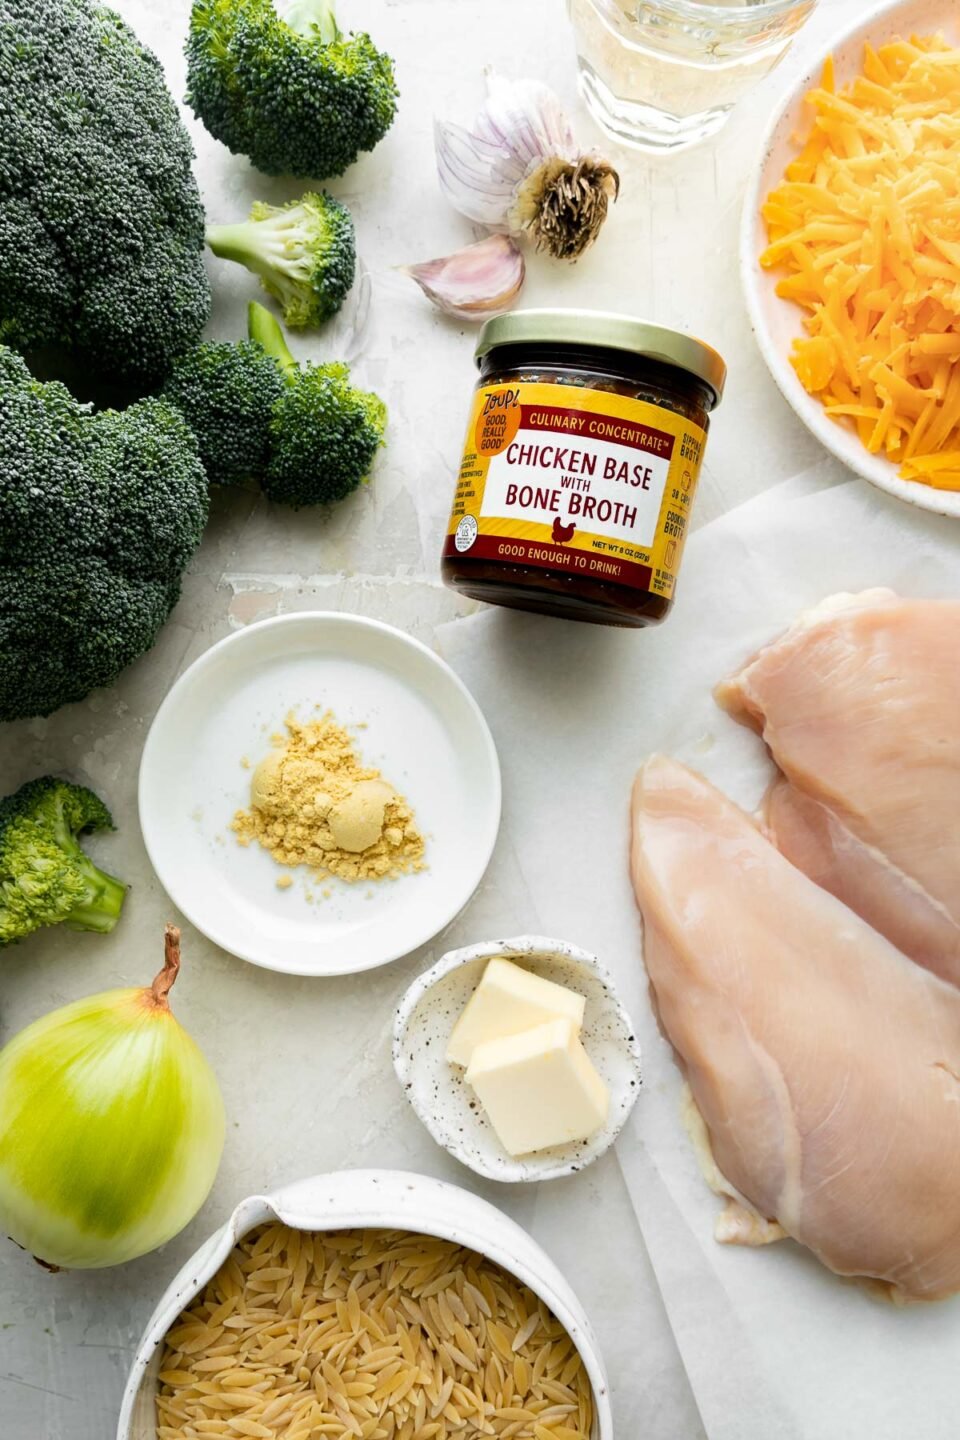 Cheesy Chicken and Broccoli Orzo Skillet ingredients arranged on a creamy white textured surface: unsalted butter, boneless, skinless chicken breasts, yellow onion, garlic, mustard powder, orzo, dry white wine, Zoup! Chicken Bone Broth Concentrate, broccoli, and sharp cheddar cheese.